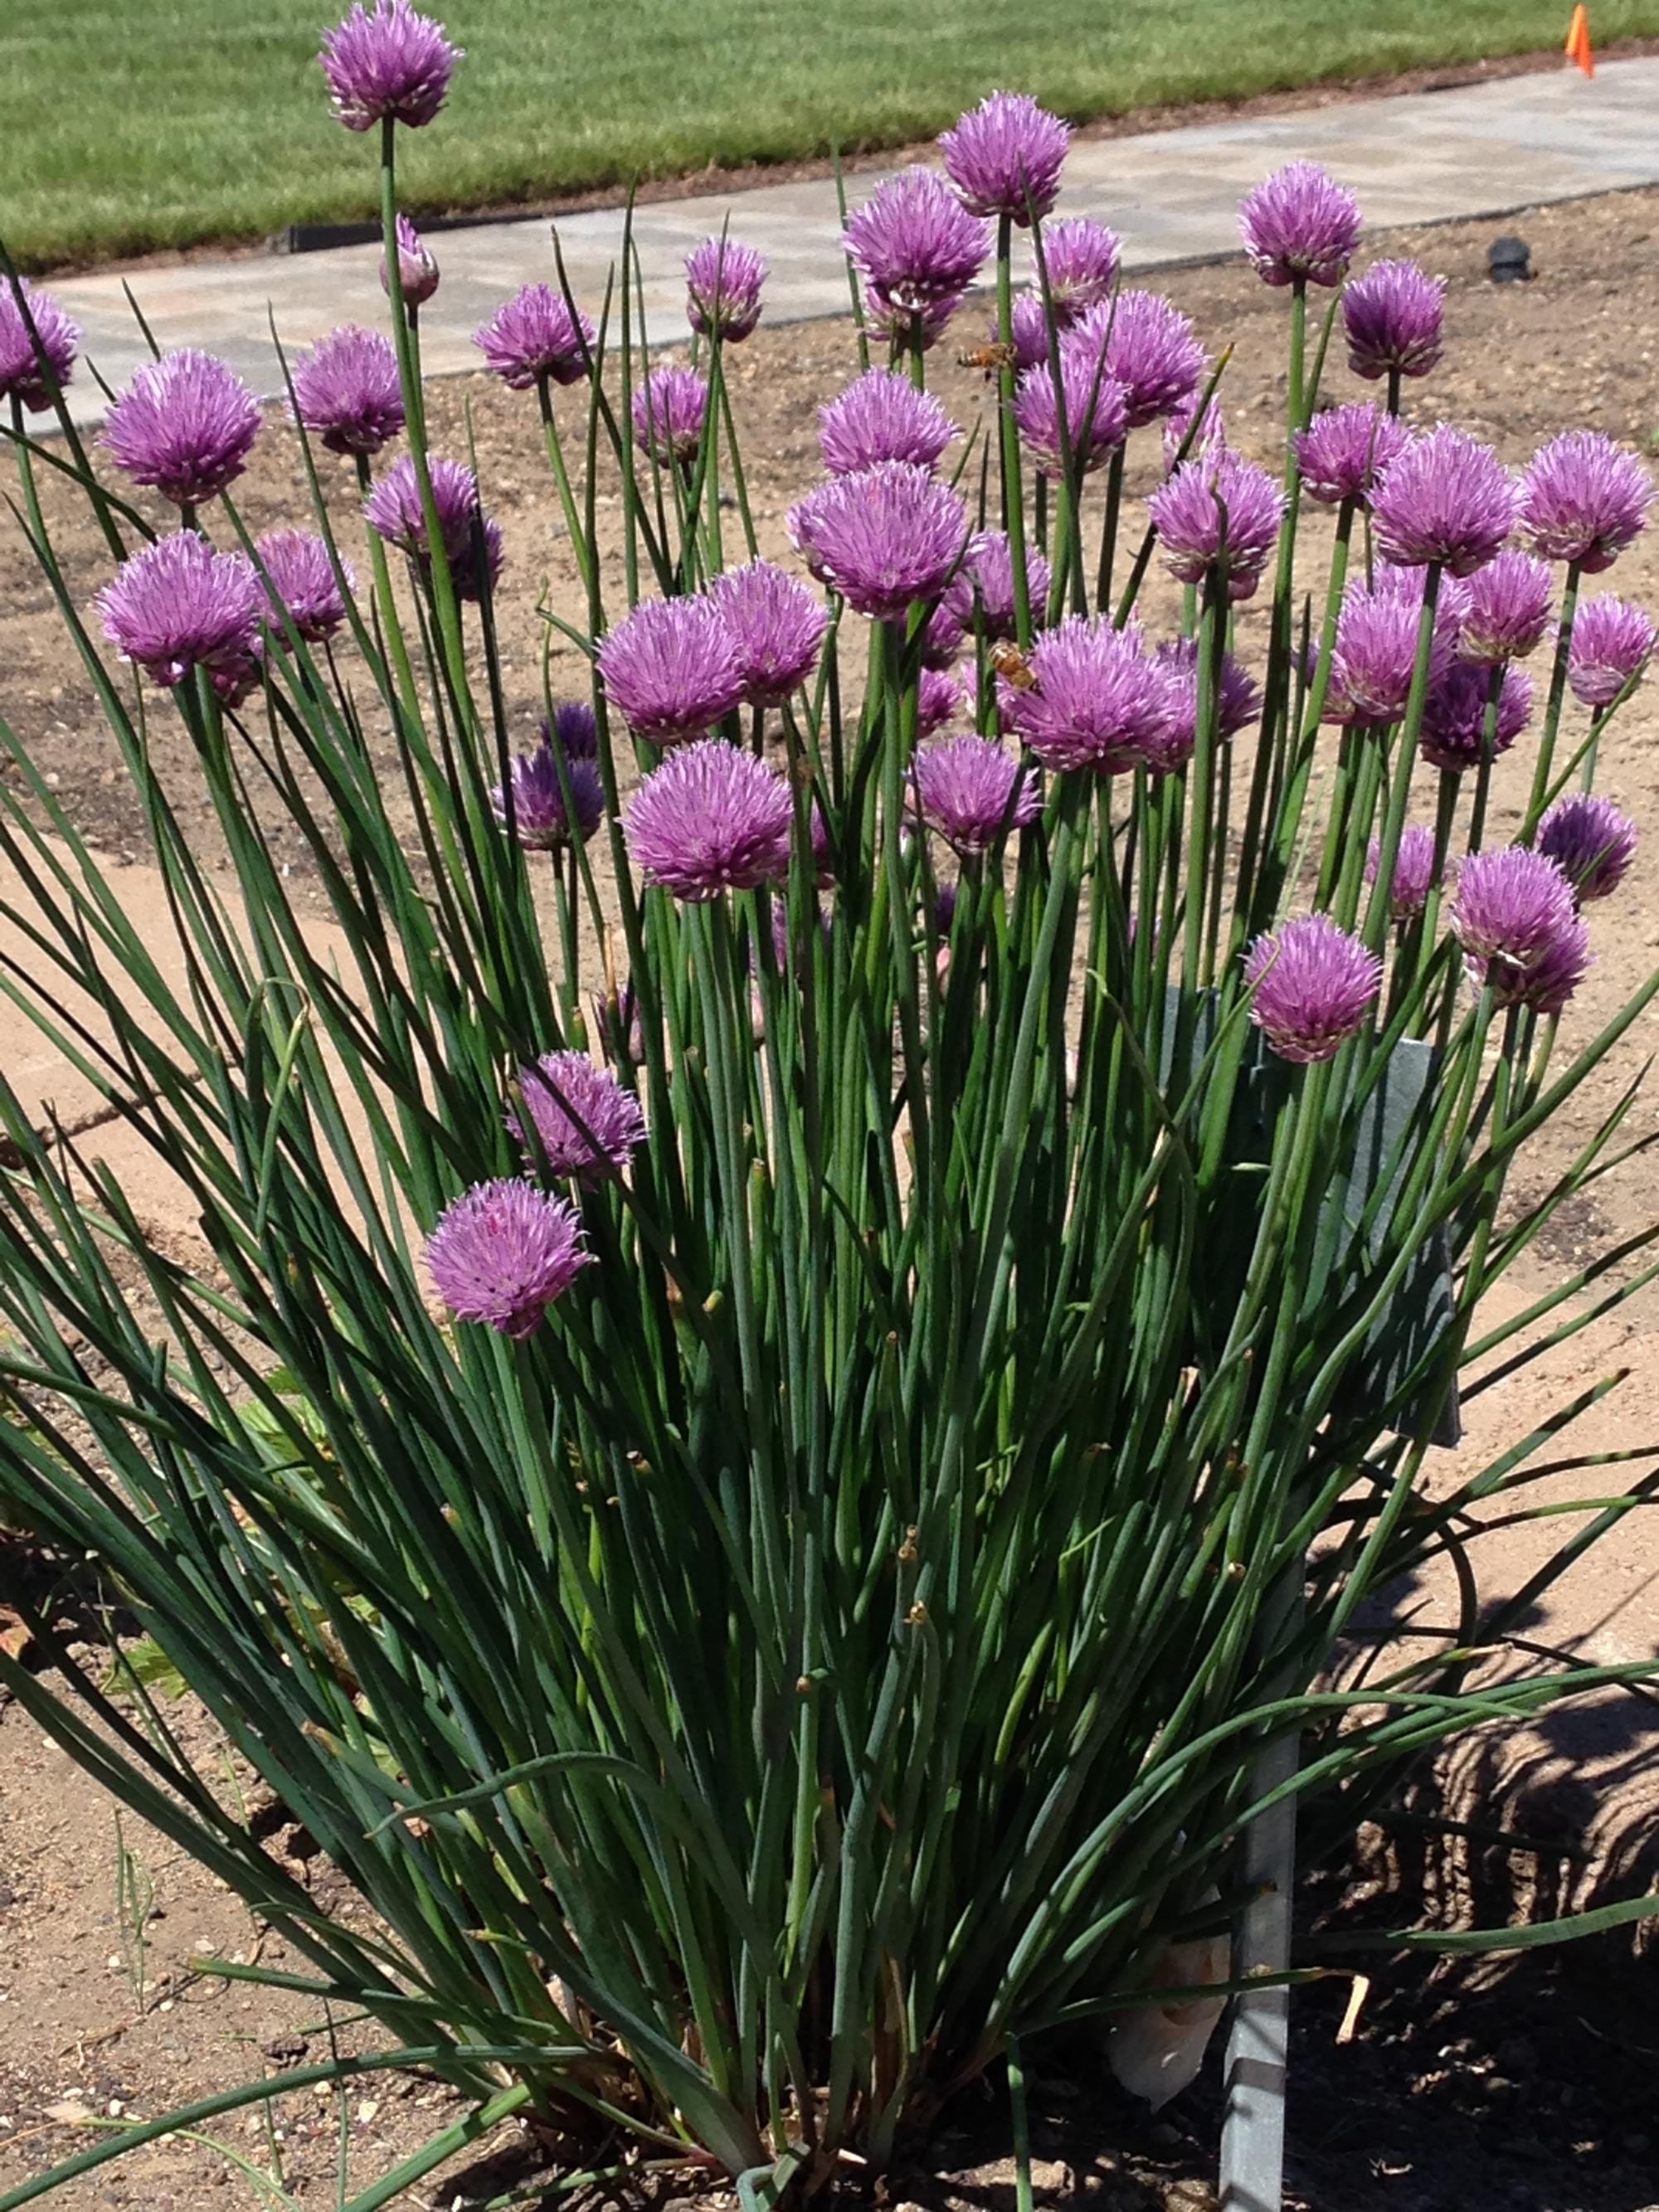 A chives plant with purple blooms.